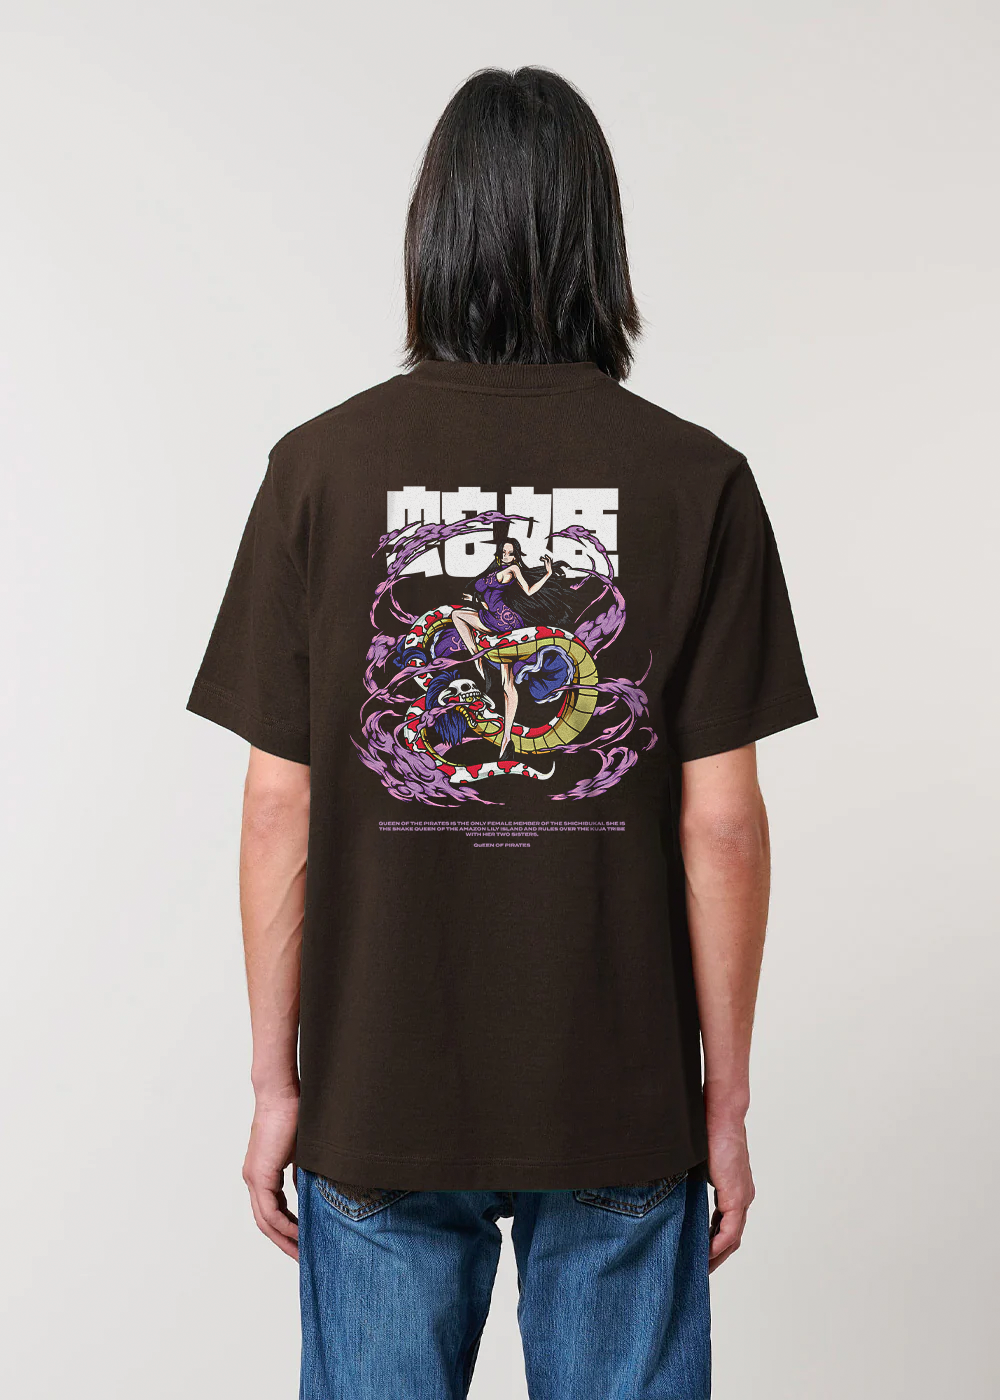 MADE IN JAPAN - QUEEN OF PIRATE® BROWN T-SHIRT